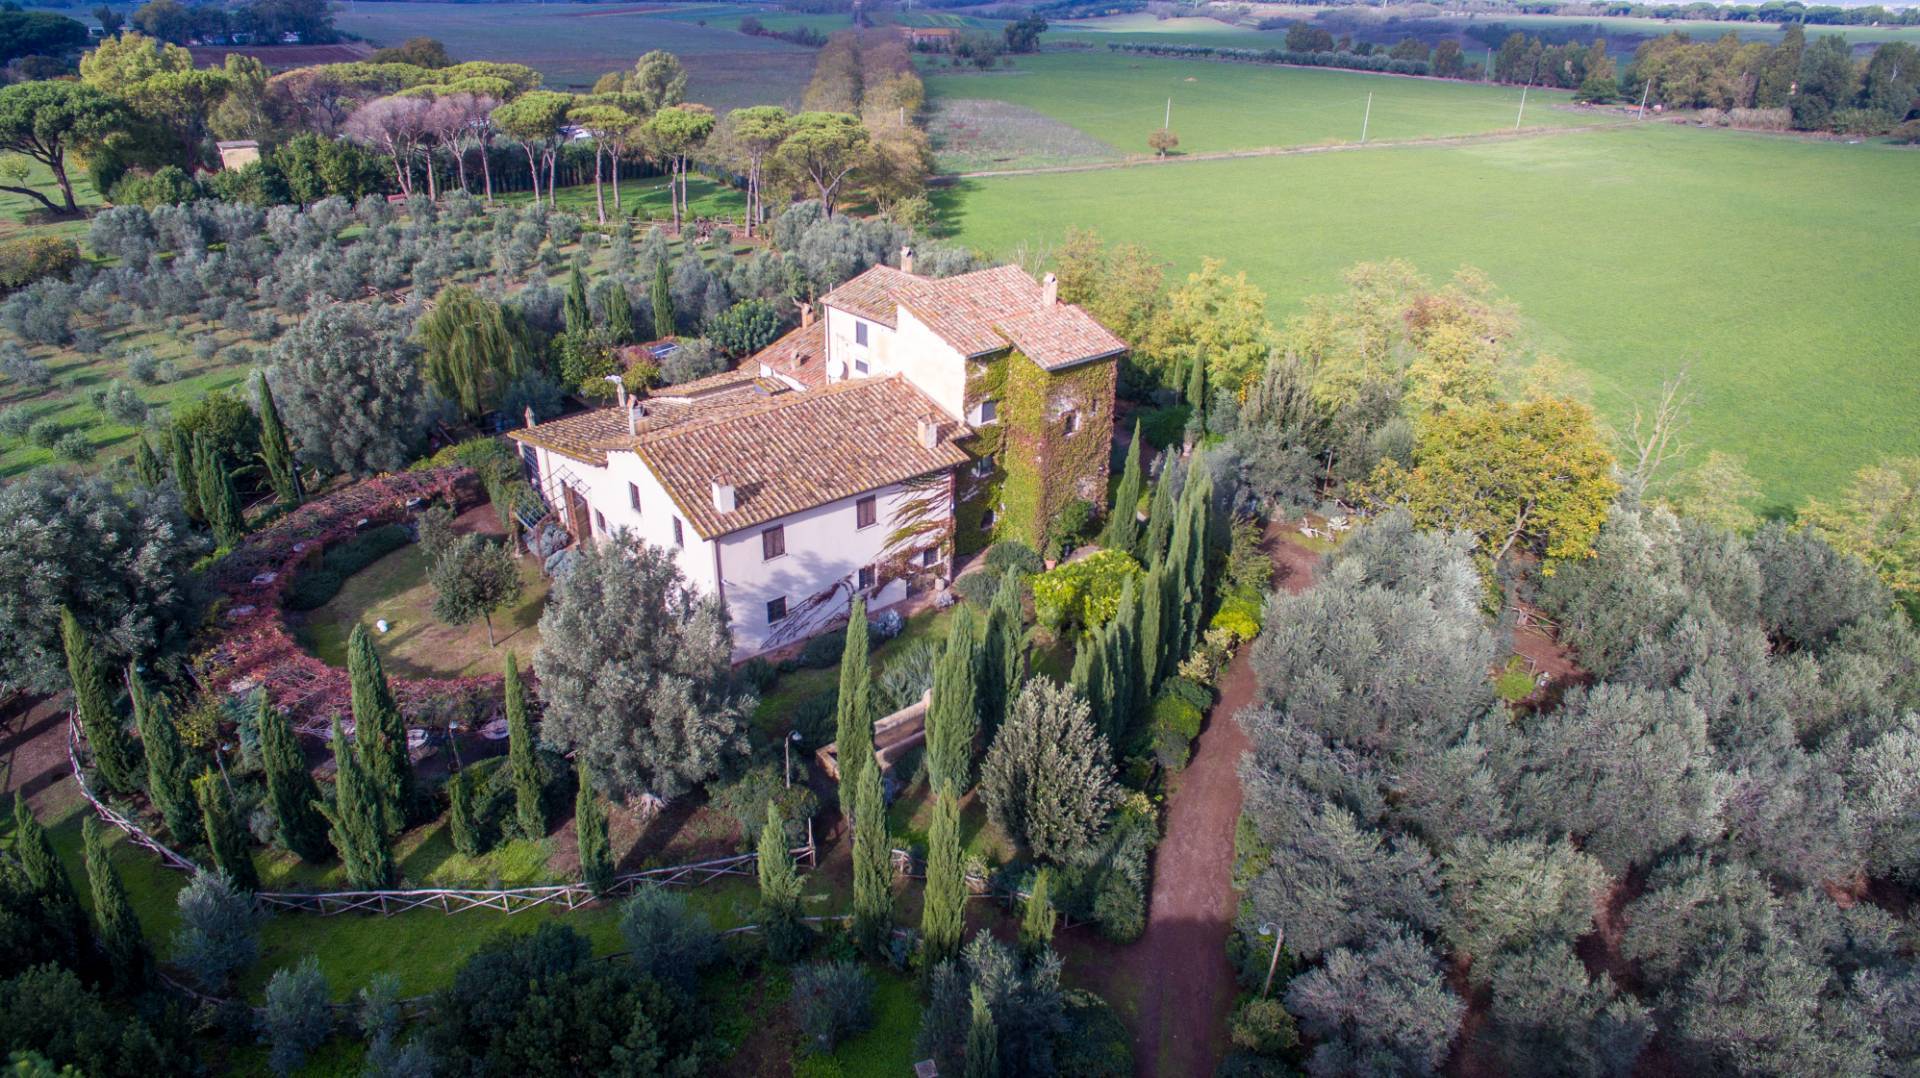 Historical 3 Bedroom Farm House For Sale, Appia Antica, Rome